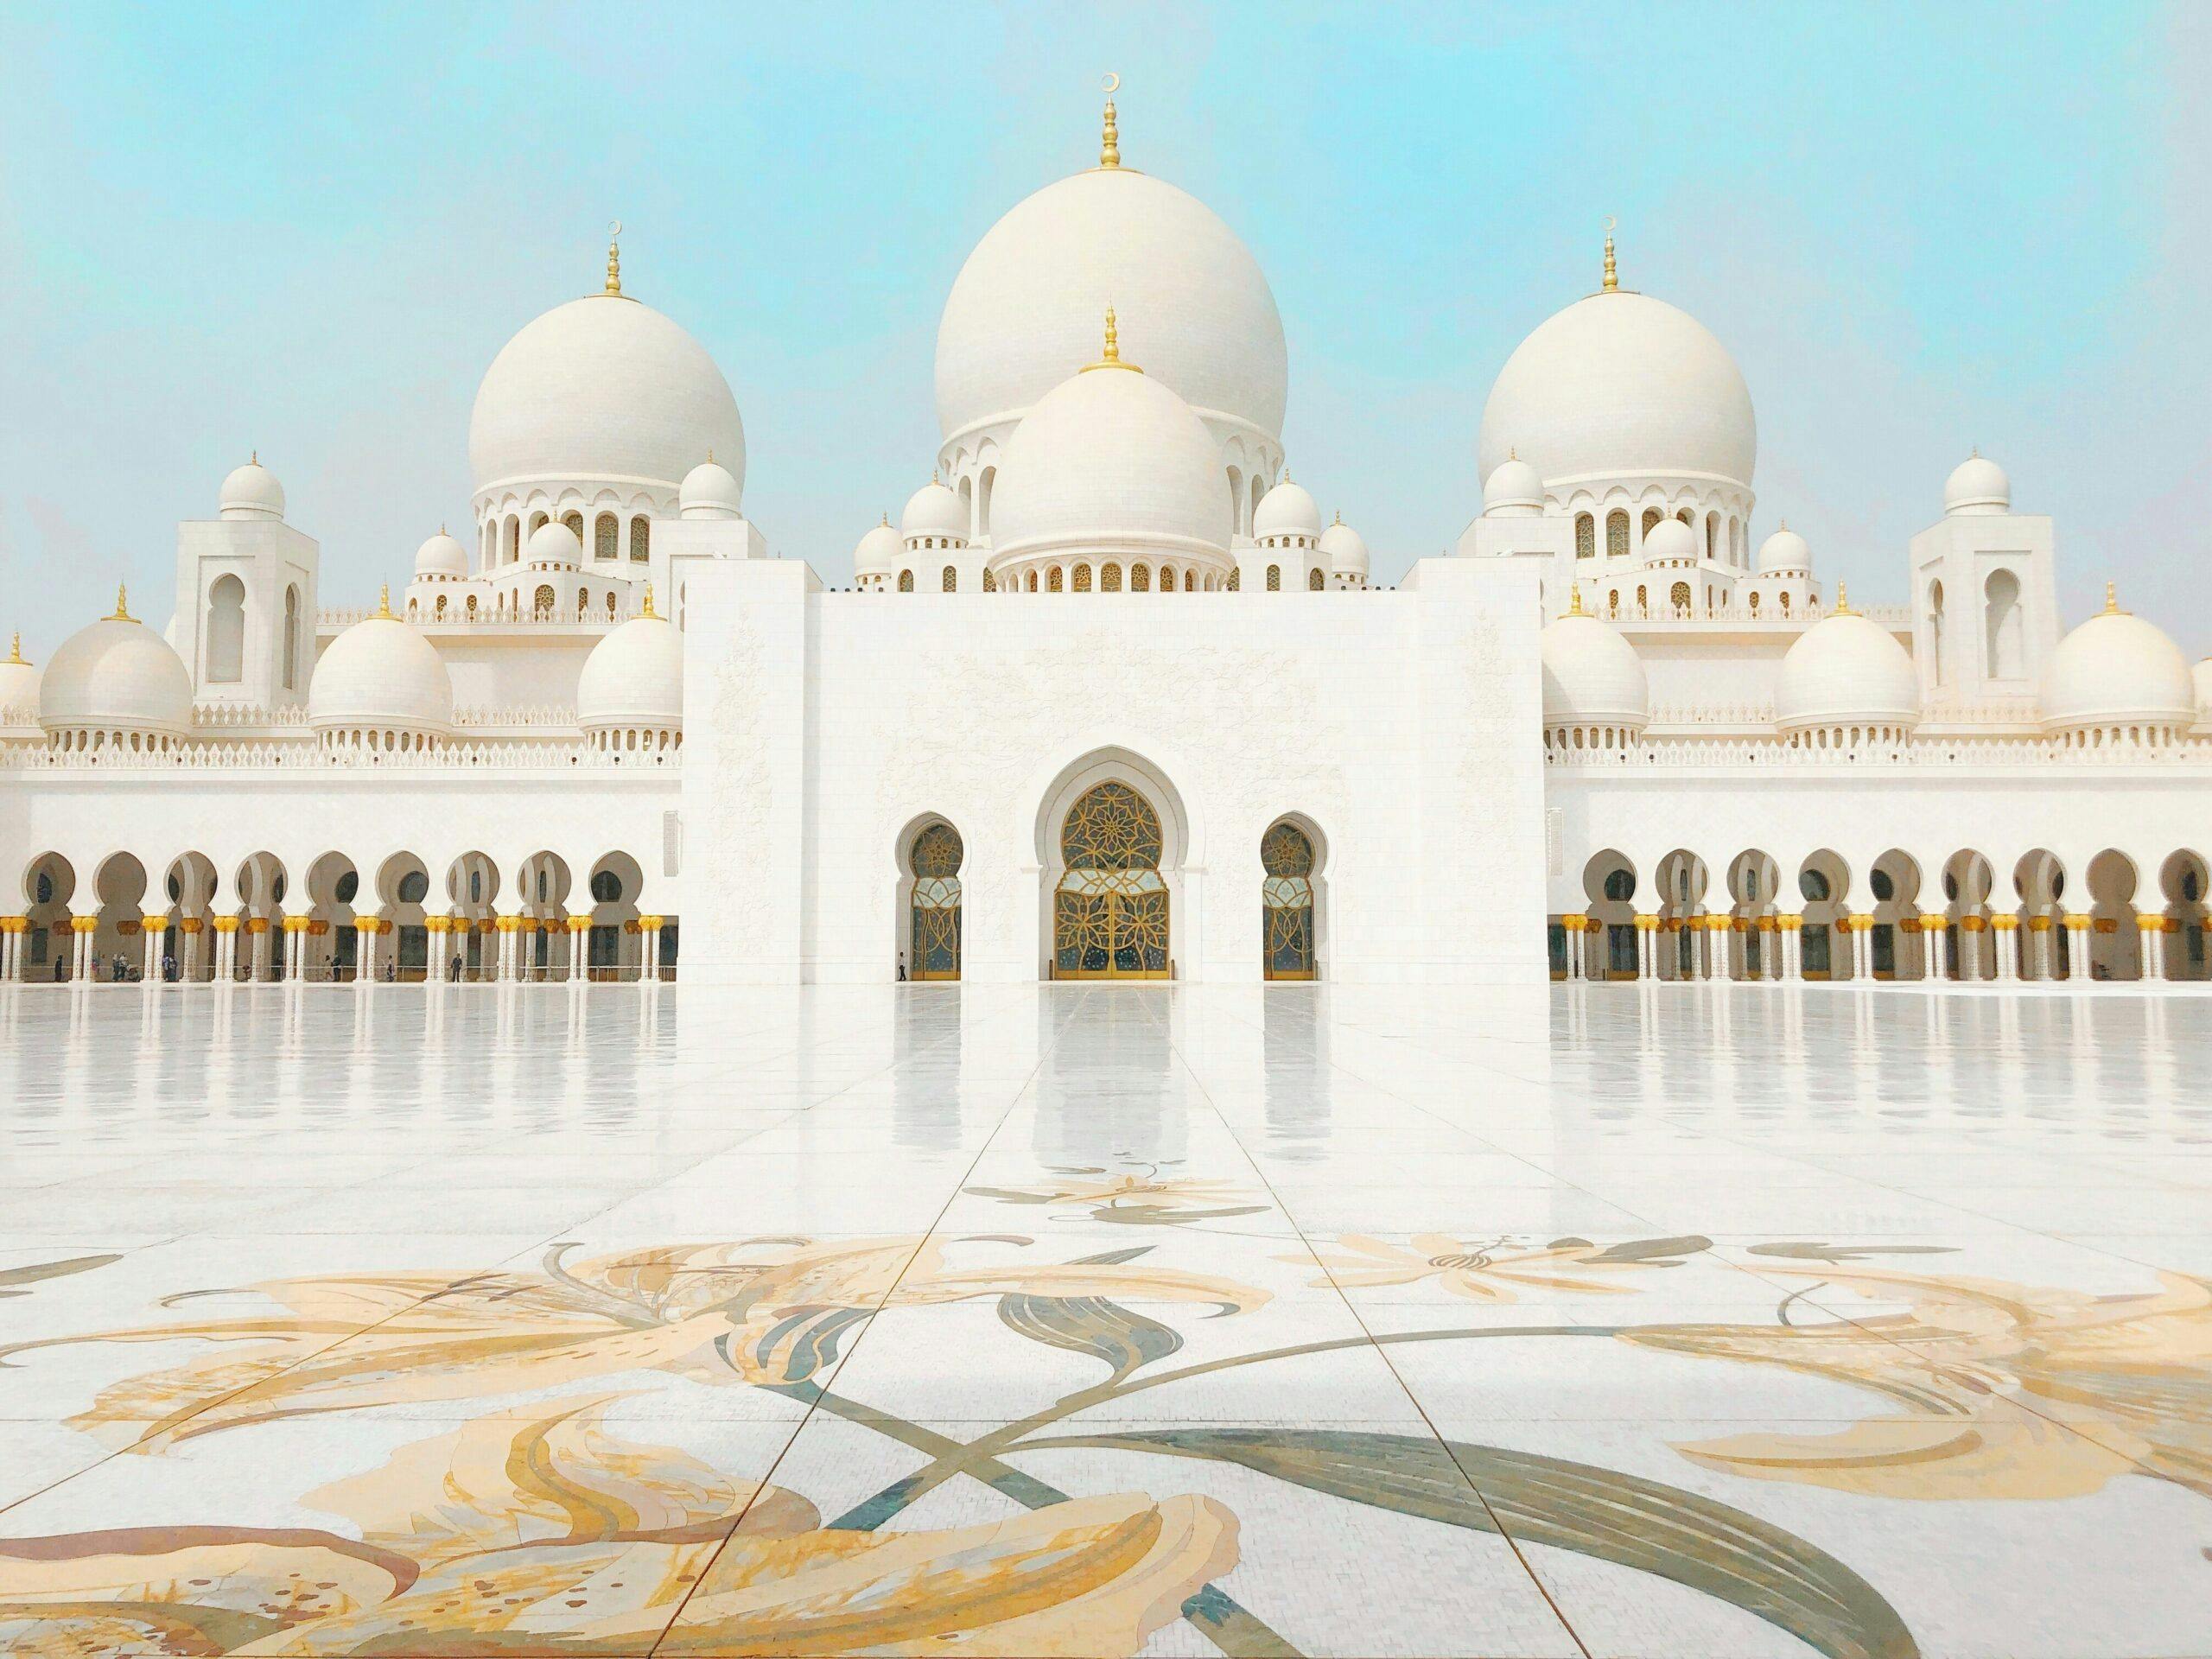 a large white building with domes and a tiled floor with Sheikh Zayed Mosque in the background